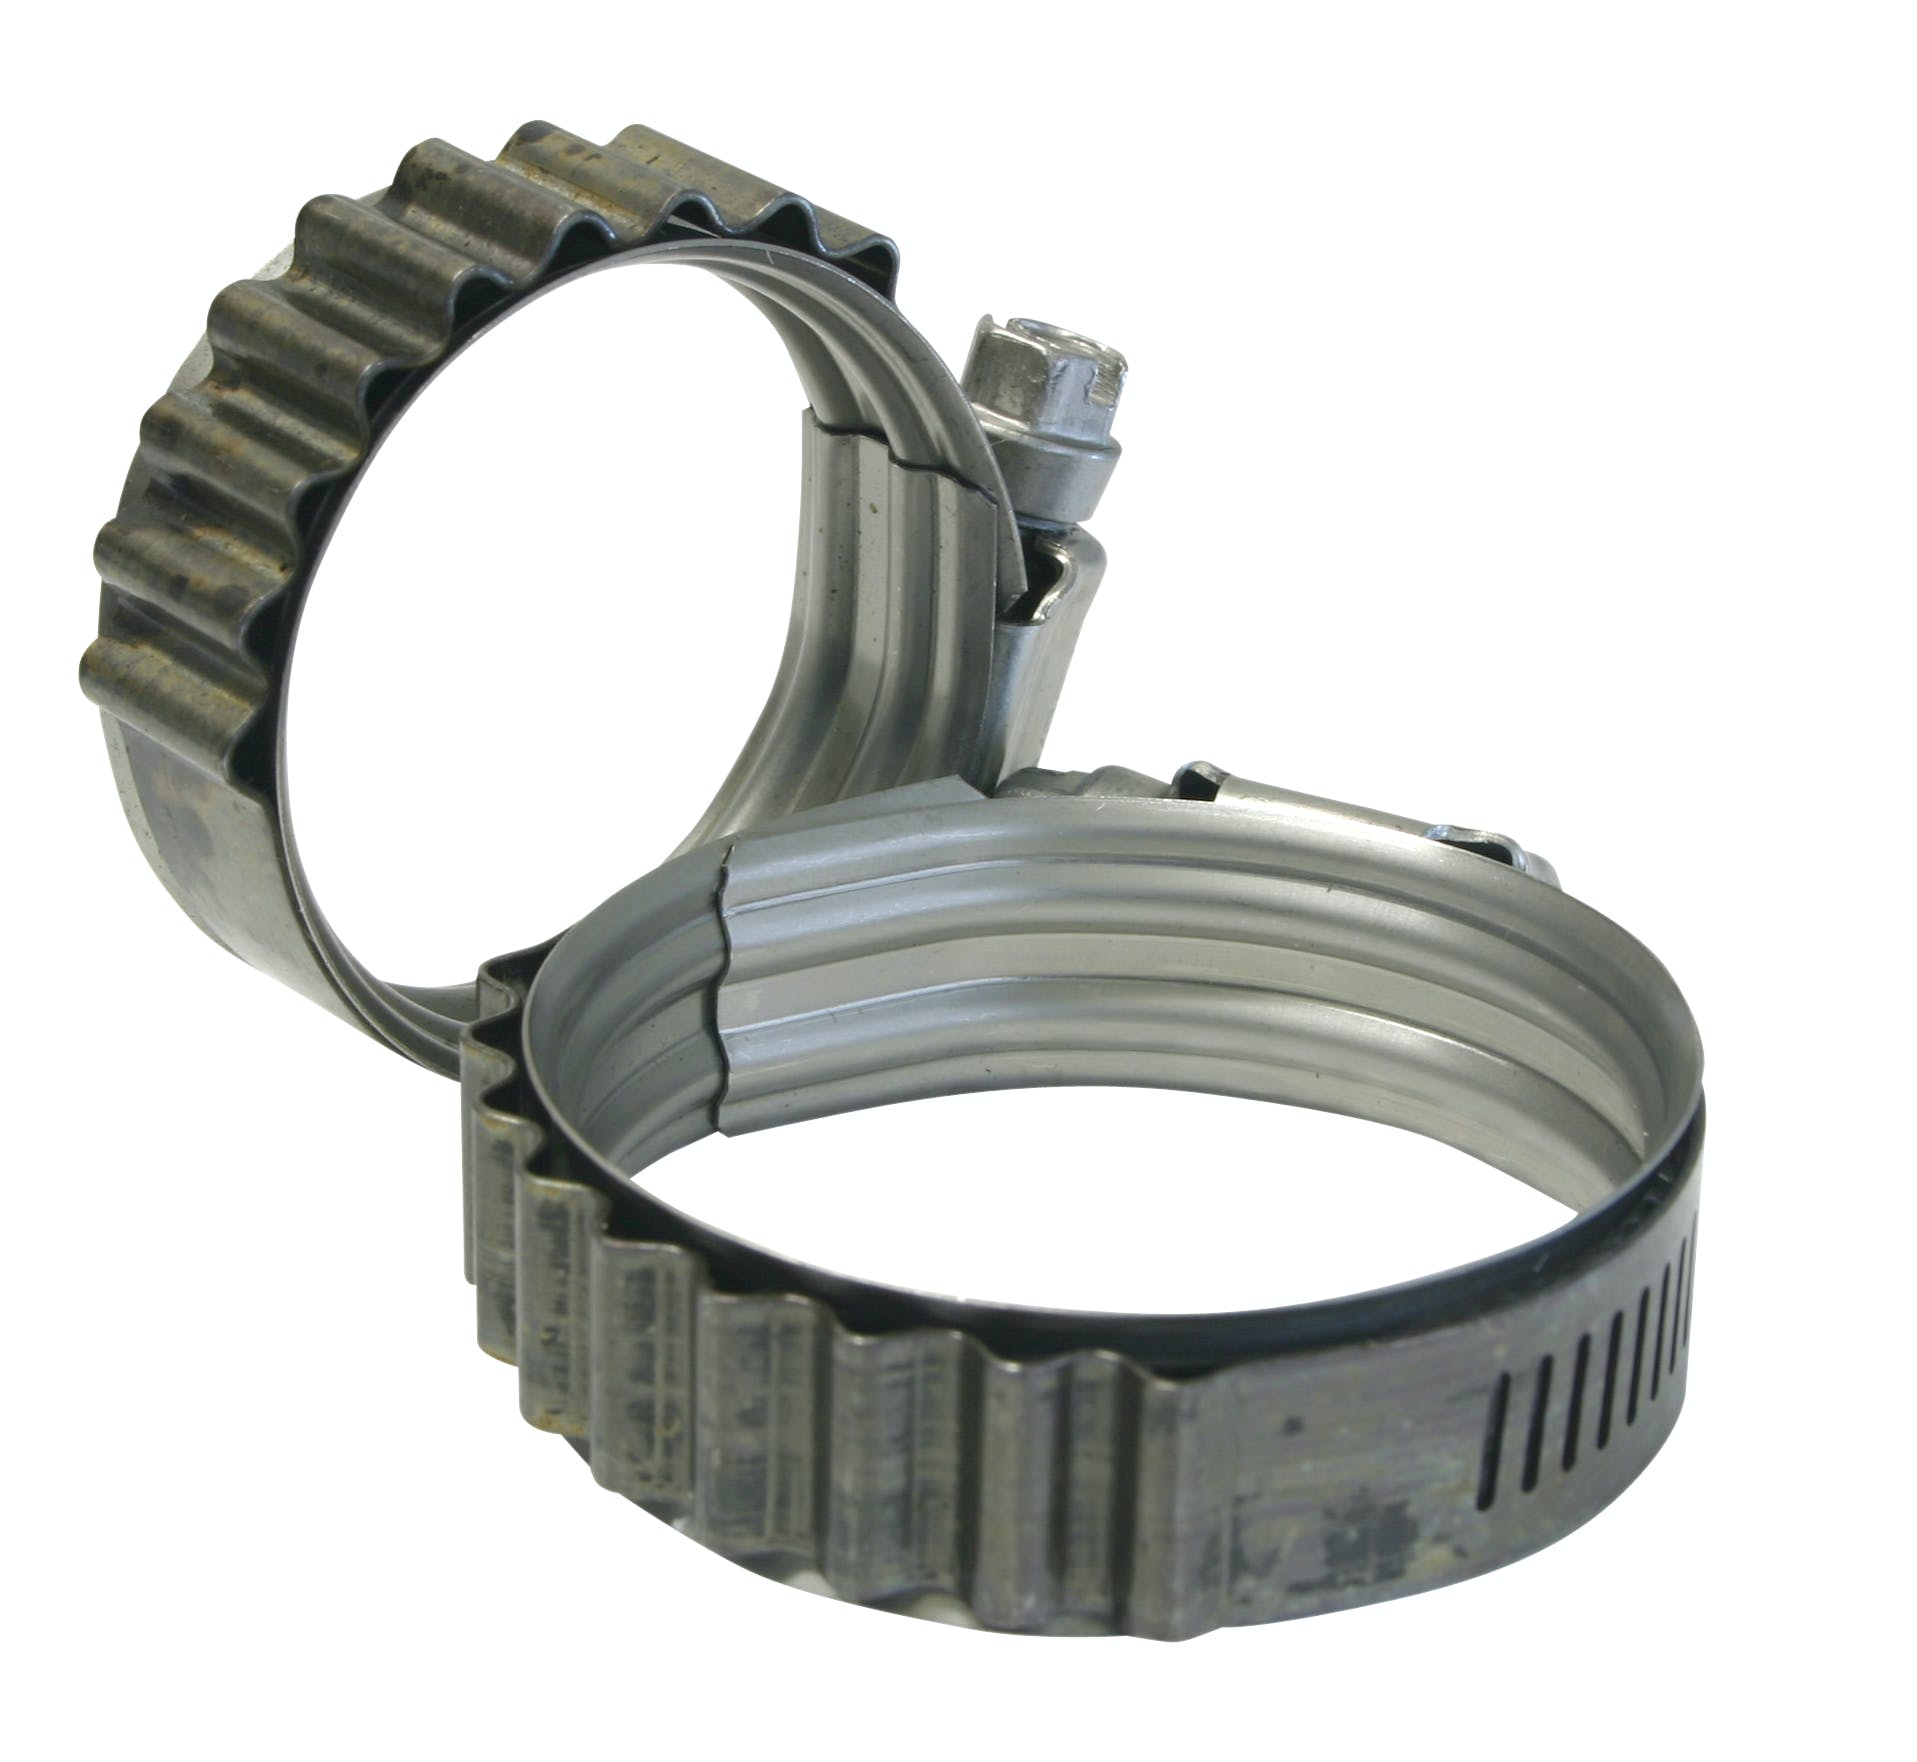 Turbosmart TS-HCT-M100 Turbo Seal Constant Tension Clamps 3.500-4.375 inch